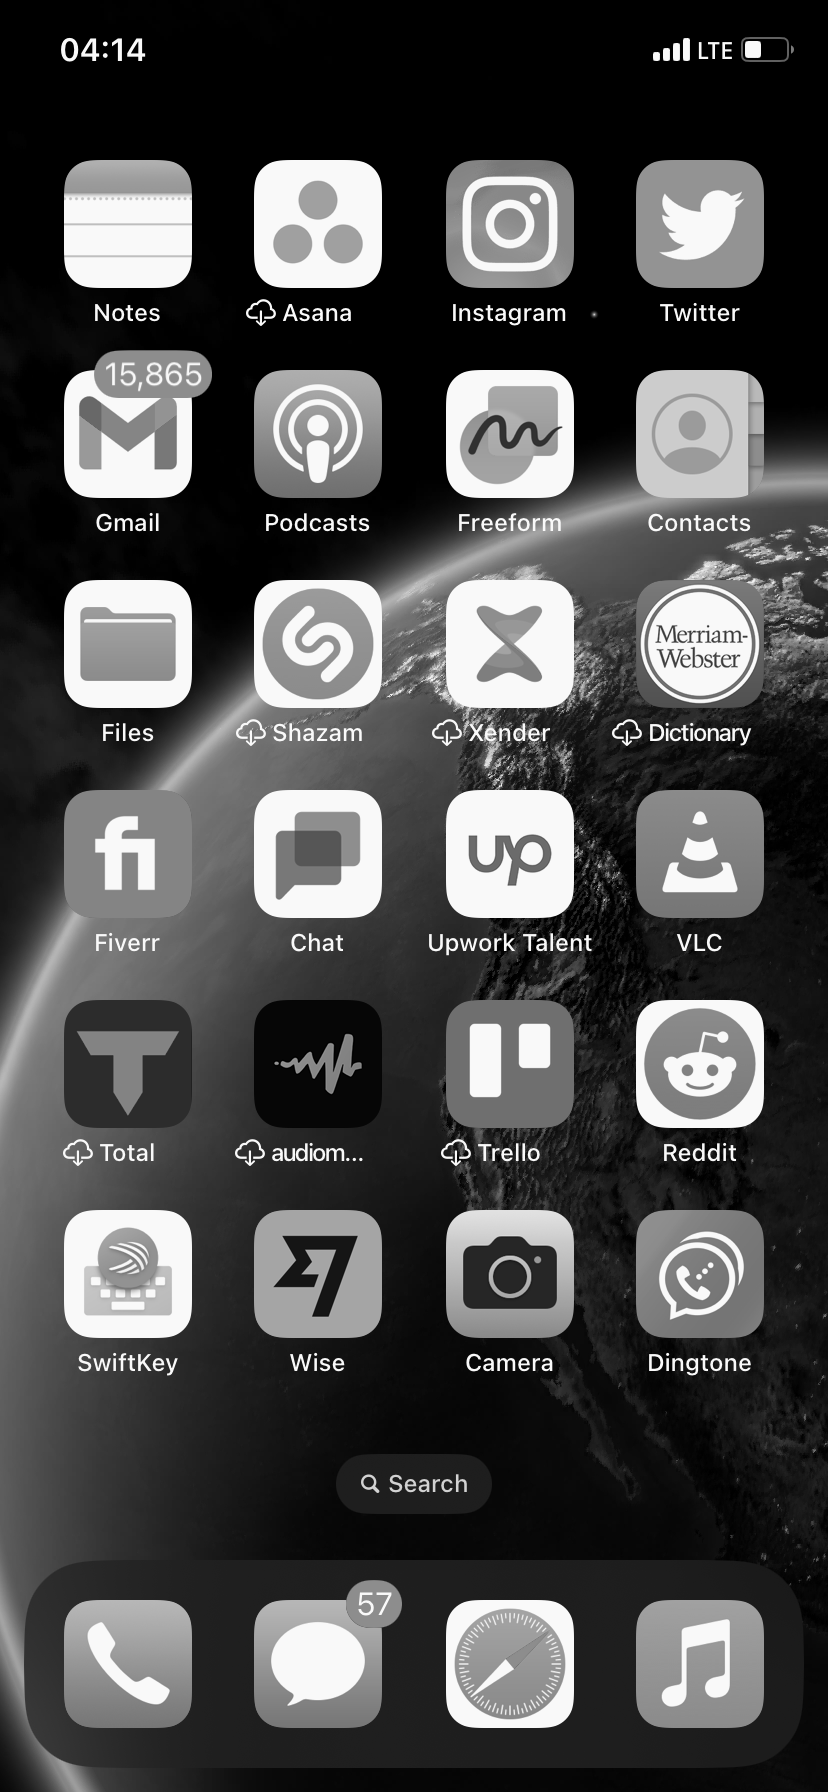 An iPhone home screen with a grayscale background and icons